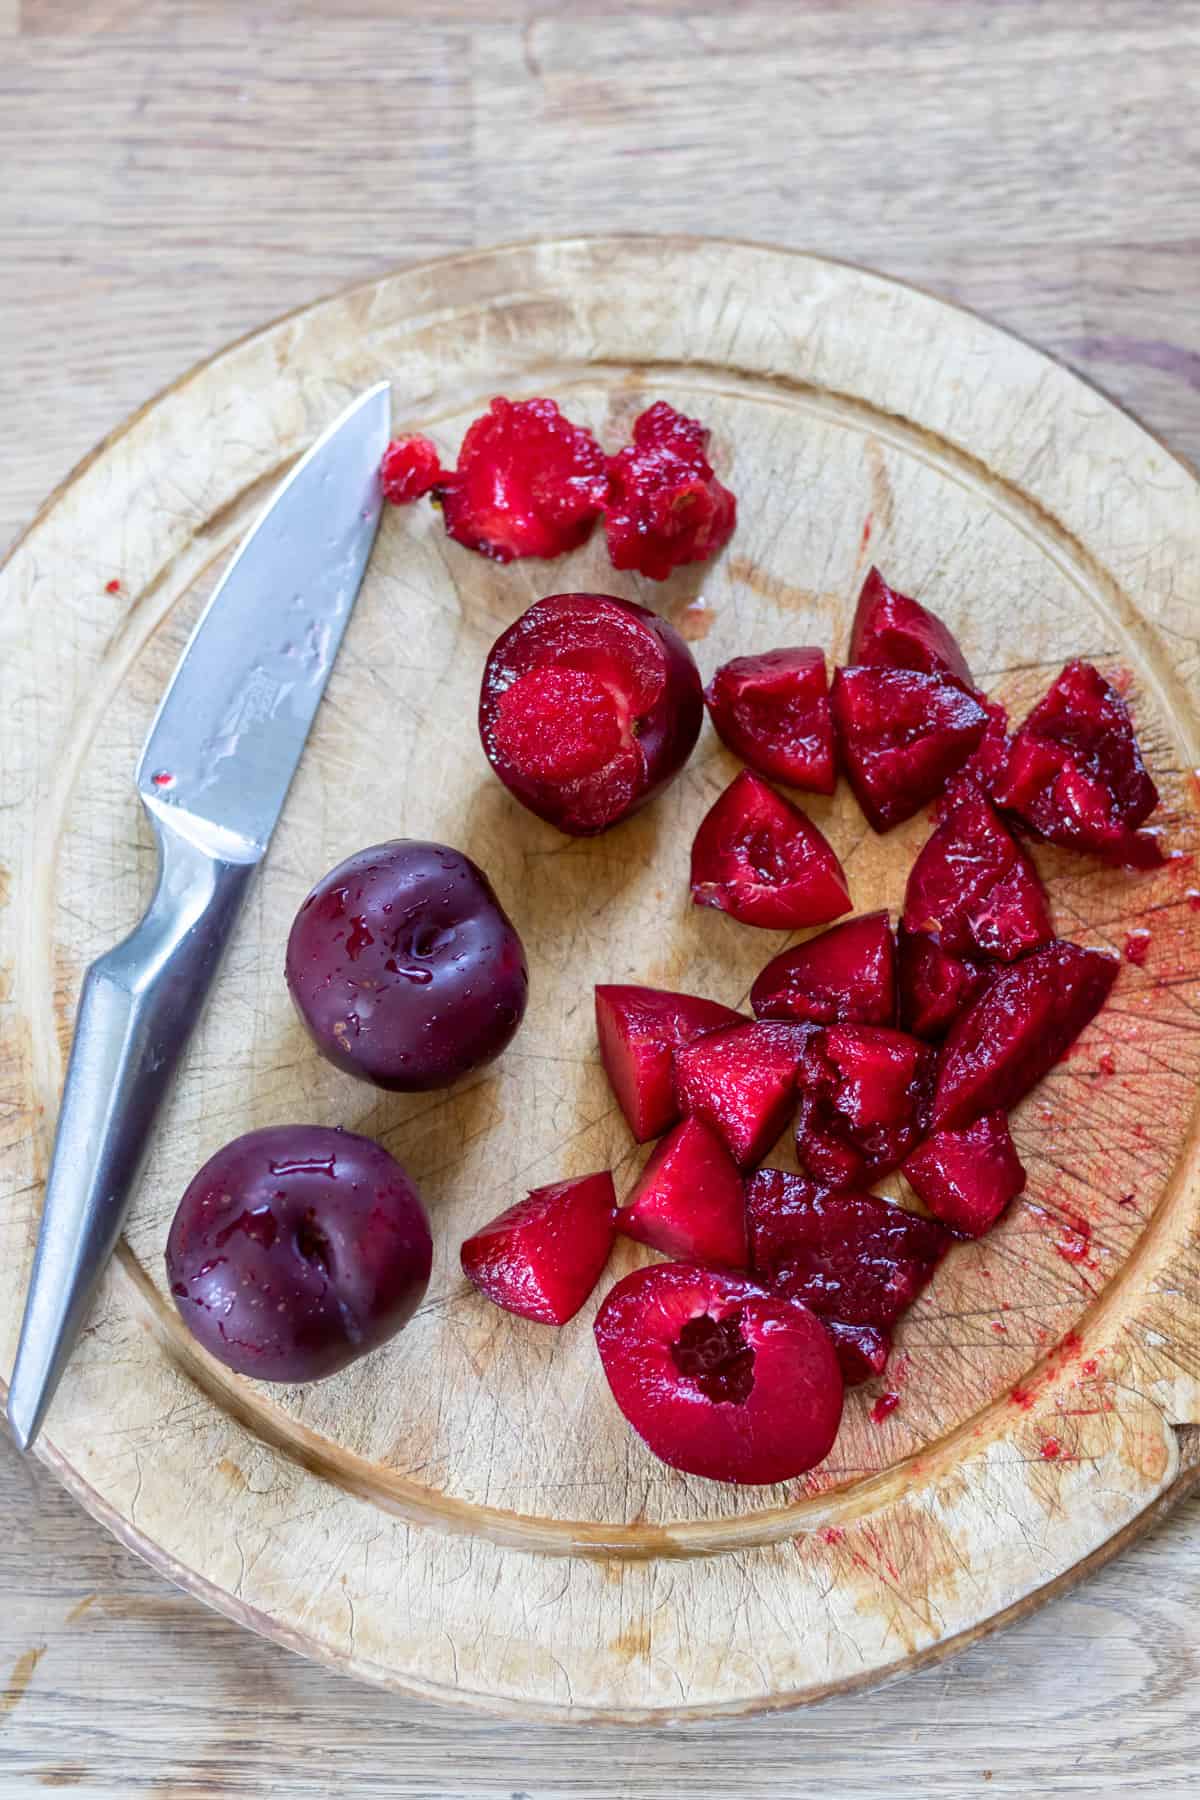 Cutting plums on a wooden board.